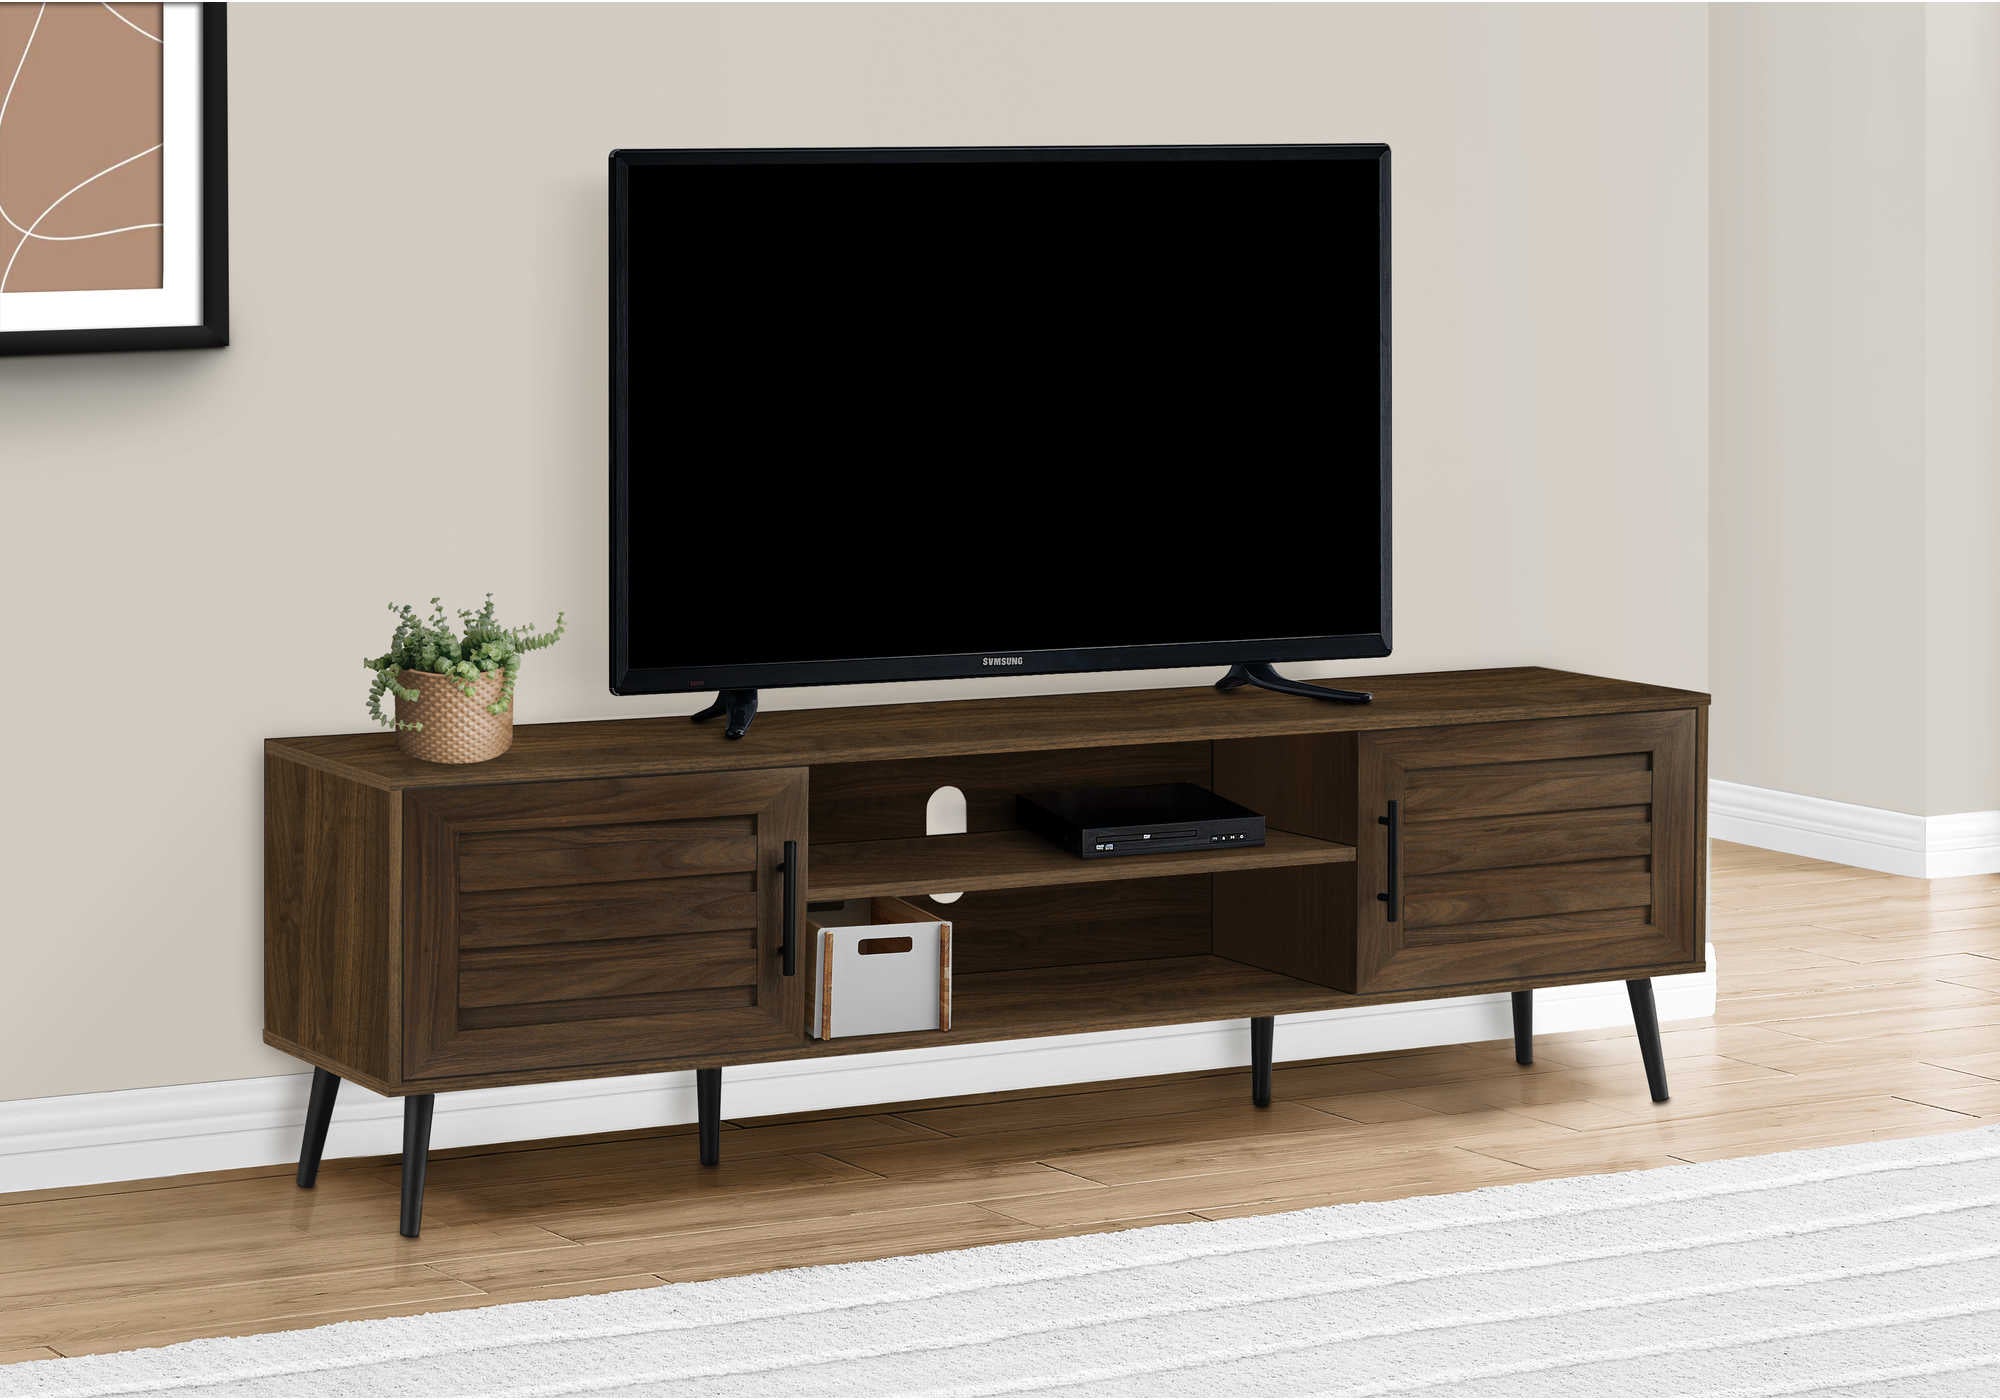 TV STAND - 72L  BROWN WOOD-LOOK WITH 2 DOORS